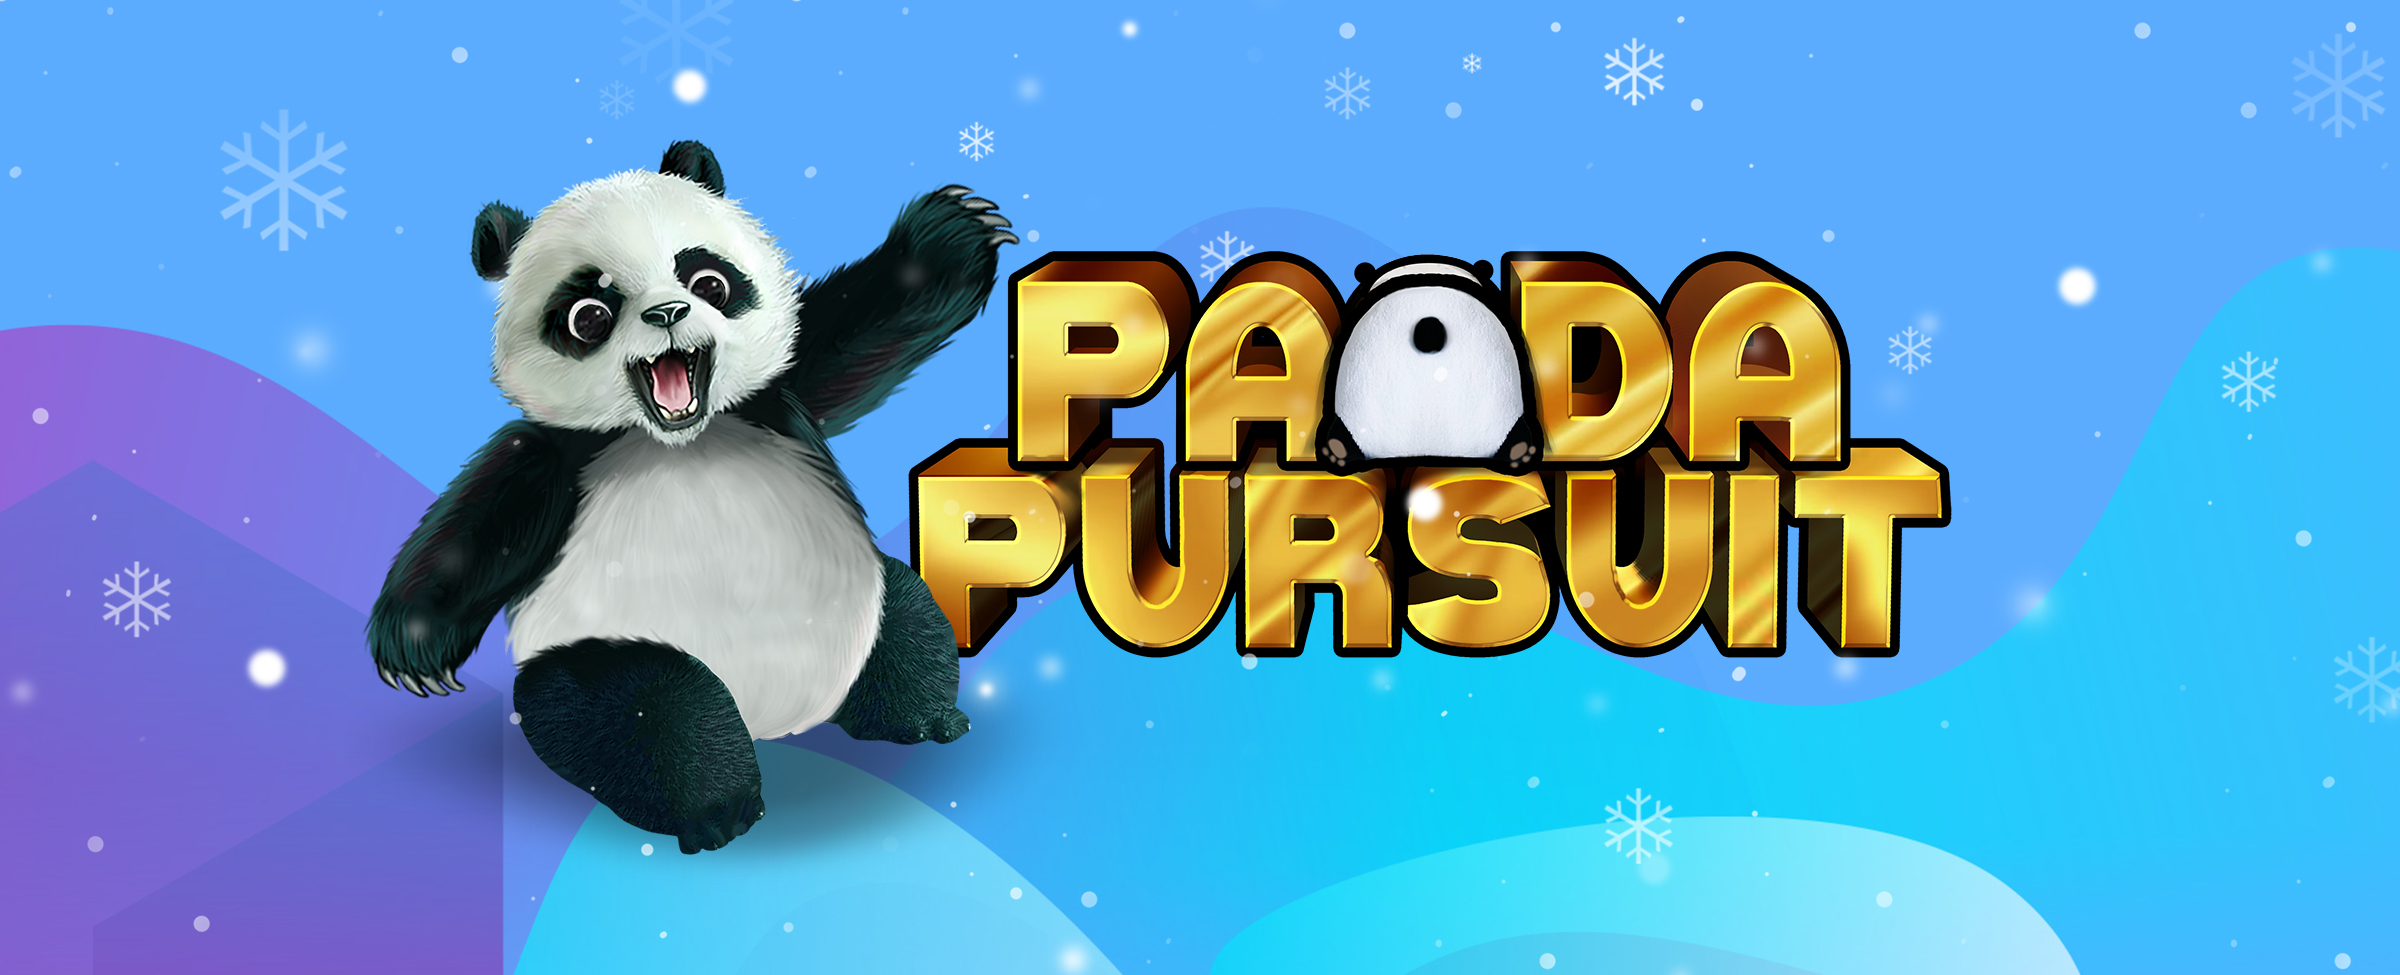 A cute 3D-animated cartoon of a giant panda sits, playfully, next to the logo from the SlotsLV slot game, which reads “Panda Pursuit”.